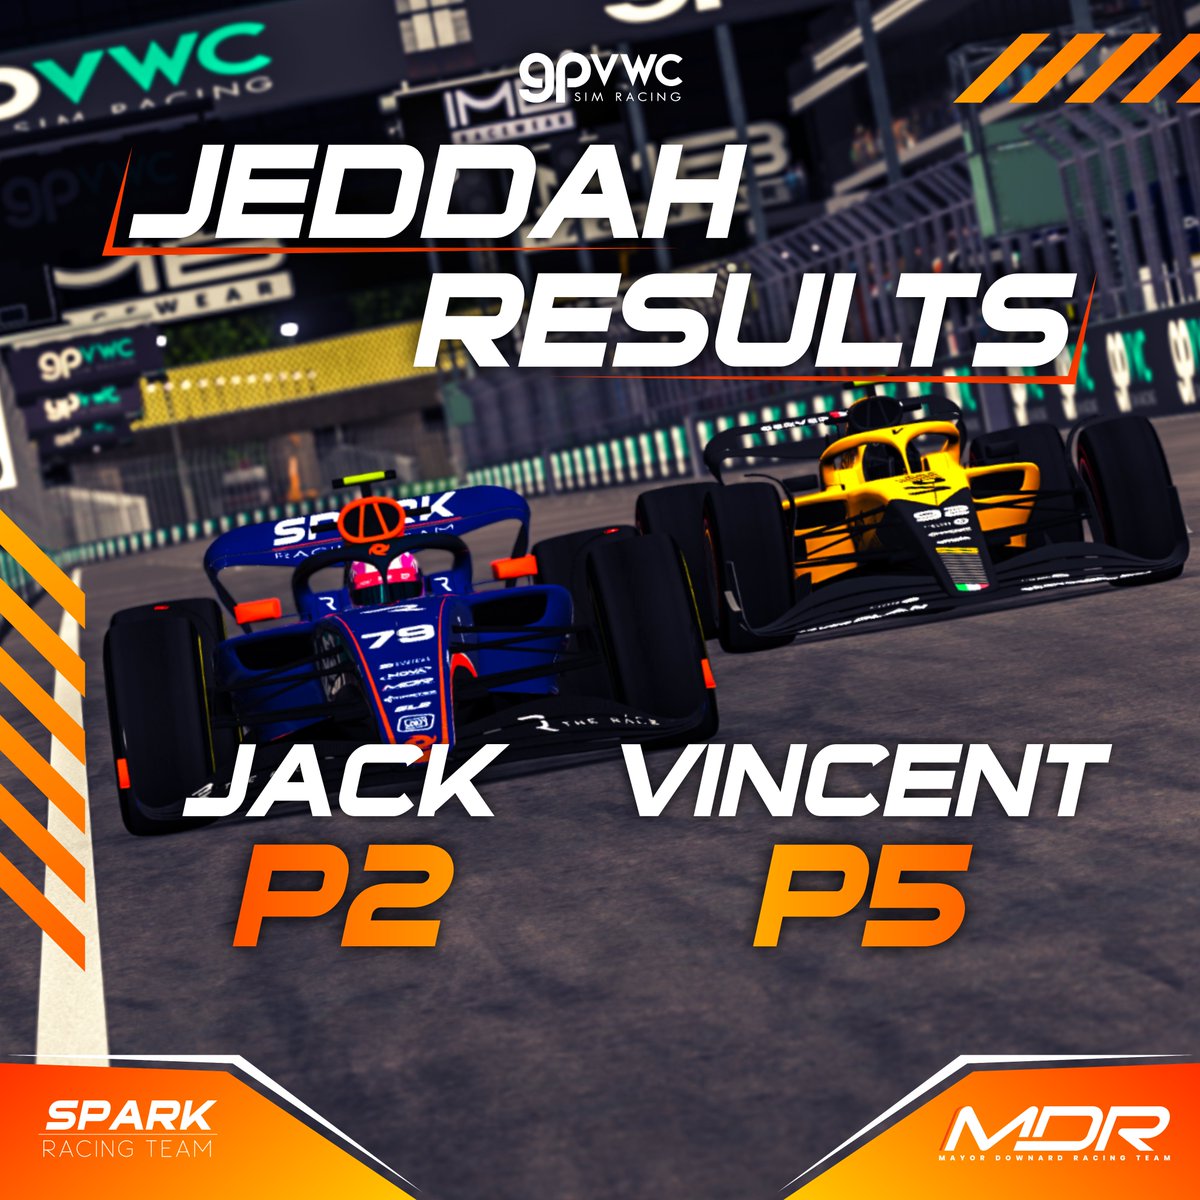 Jack is back on the podium, and Vincent was overtaken on the final lap after a tough battle for P4 with Hurlock. #gpvwc #SL2 #simracing #esports #SaudiArabianGP #top